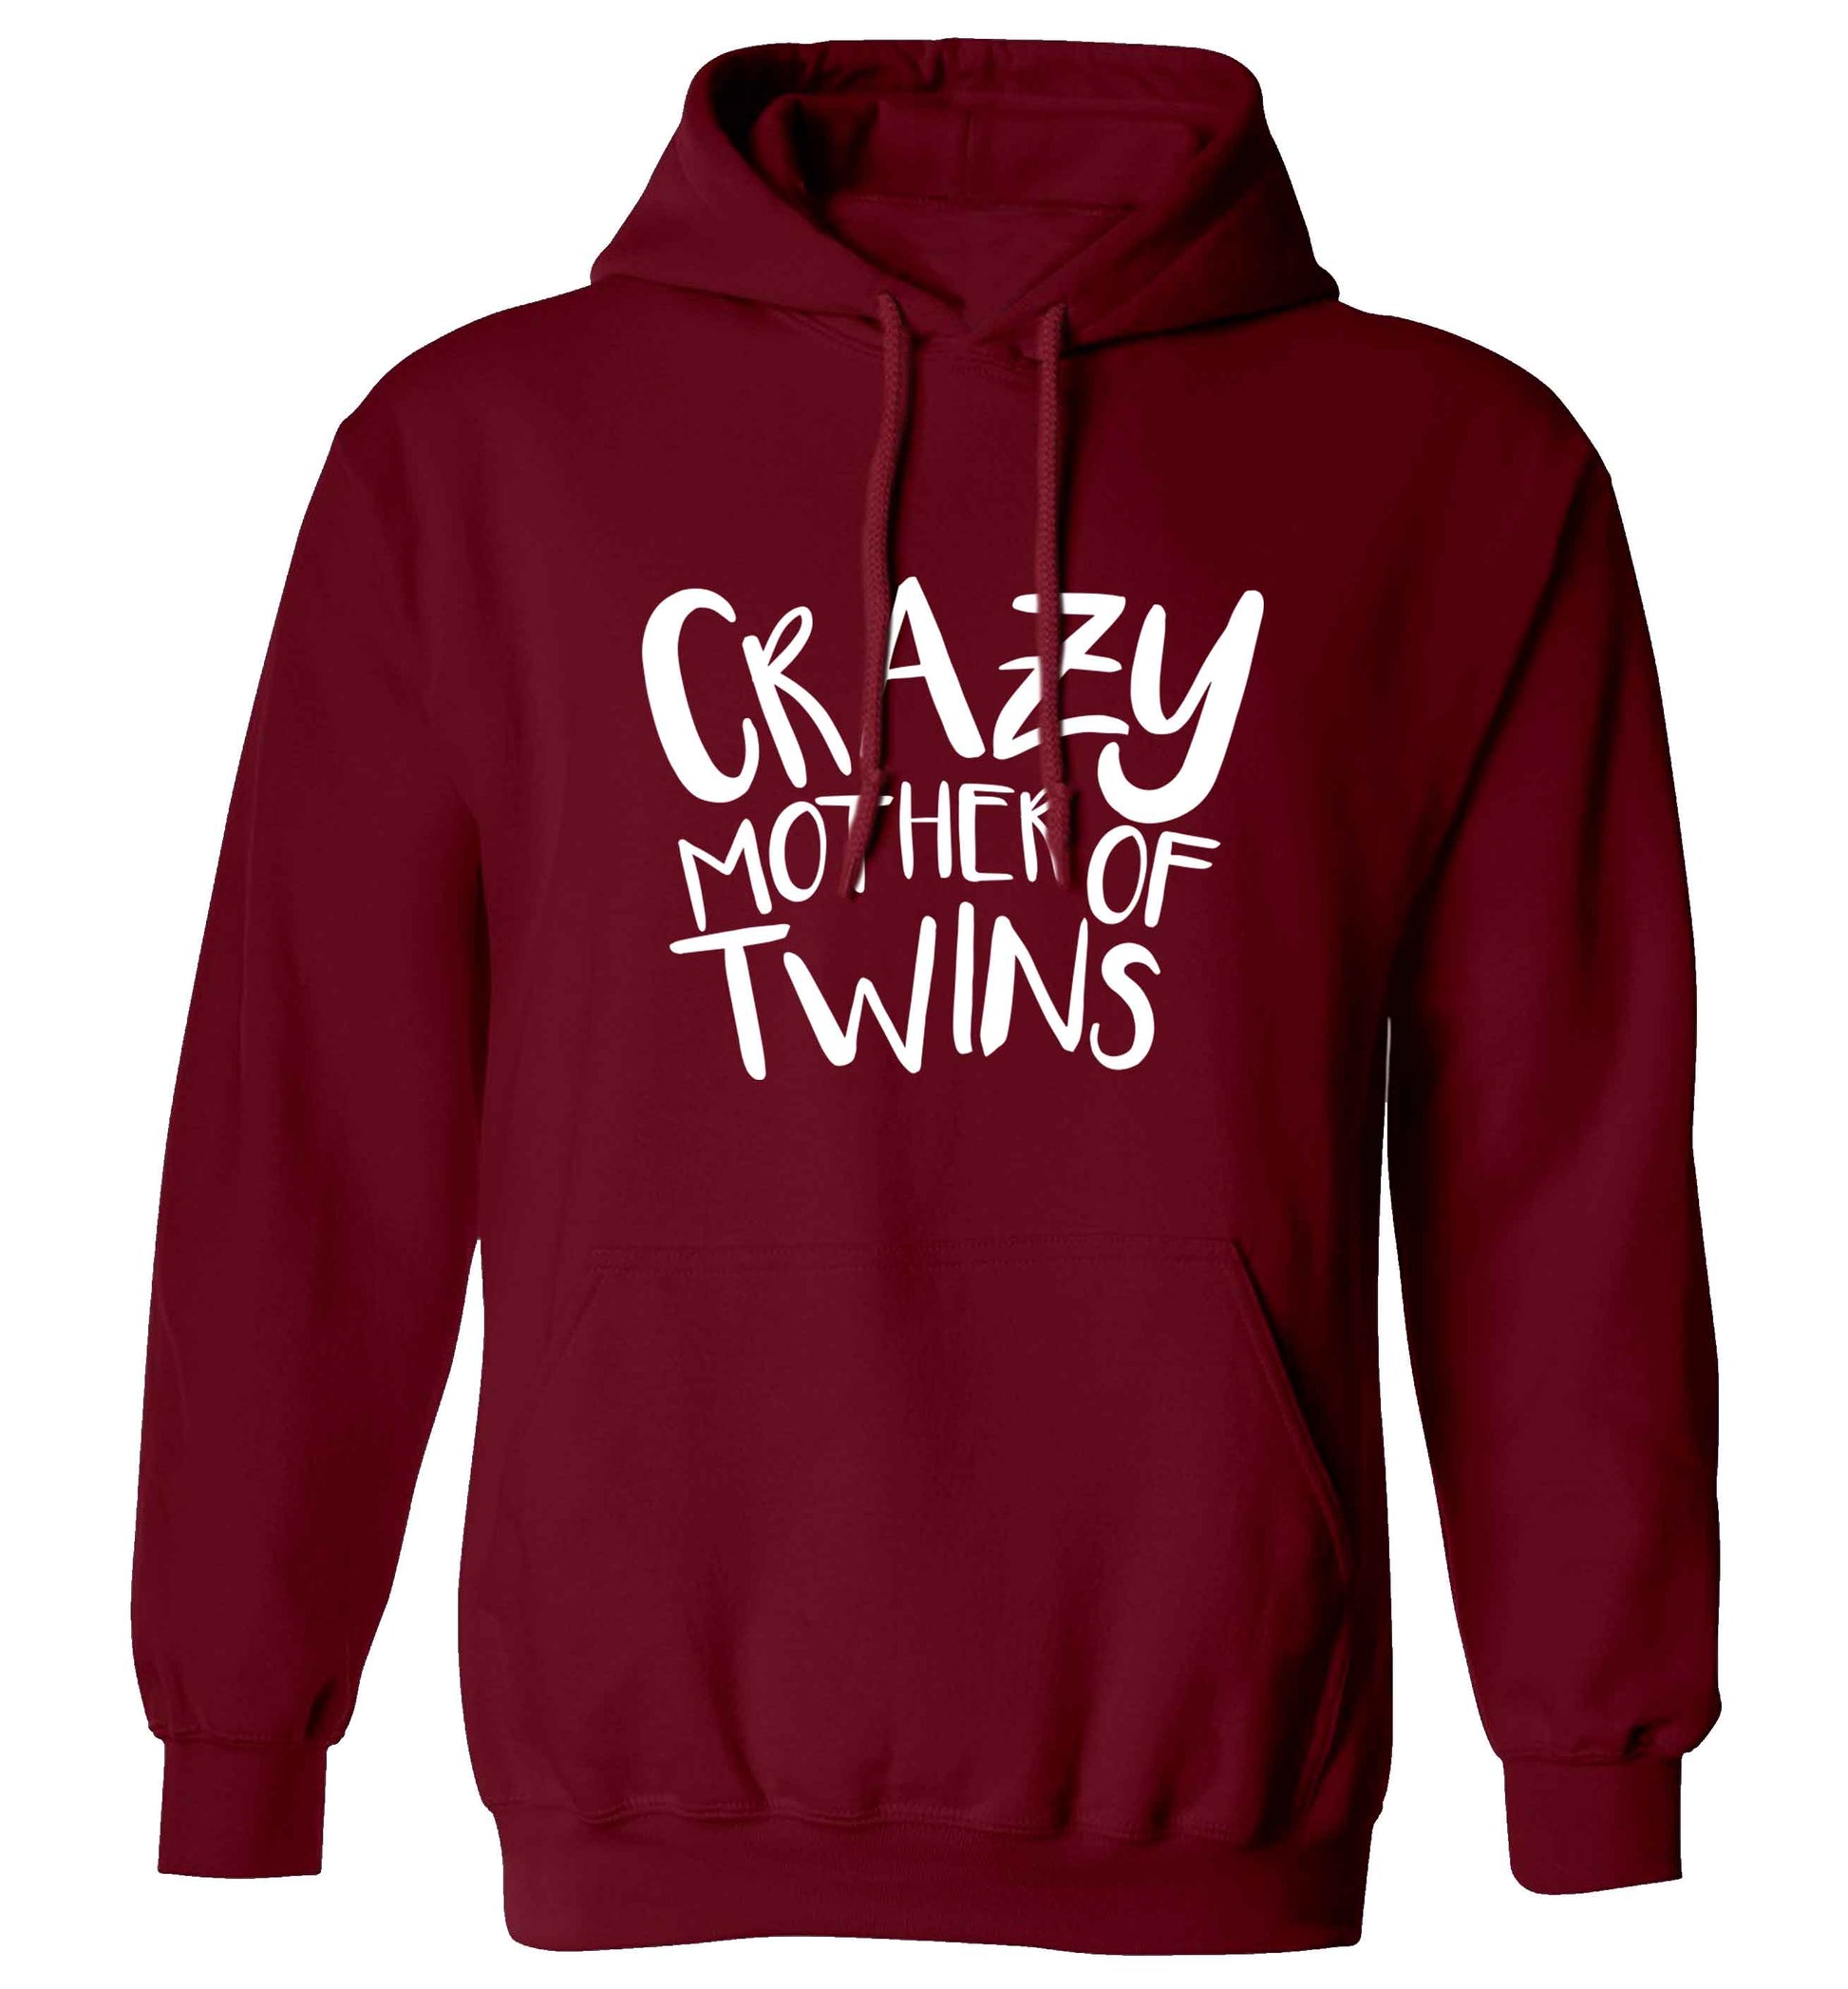 Crazy mother of twins adults unisex maroon hoodie 2XL